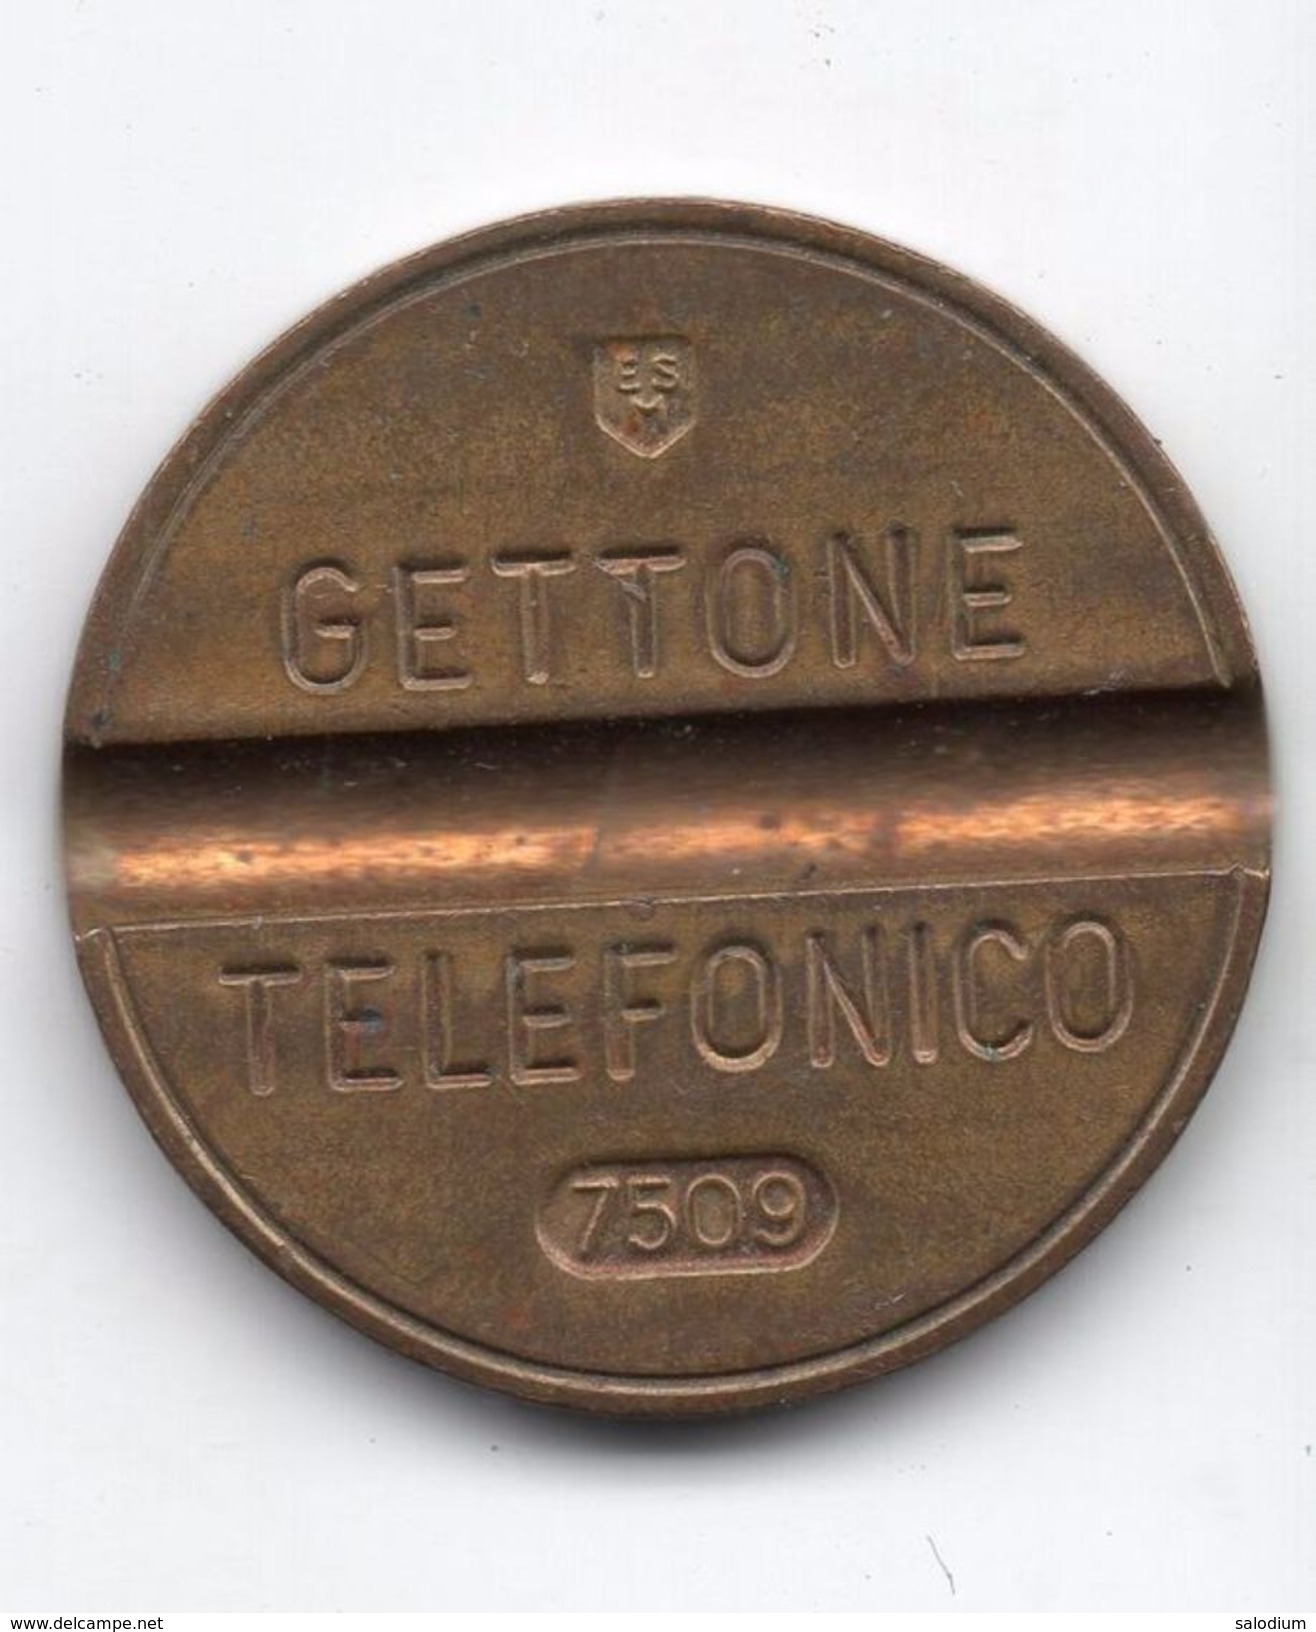 Gettone Telefonico 7509 Token Telephone - (Id-845) - Professionals/Firms